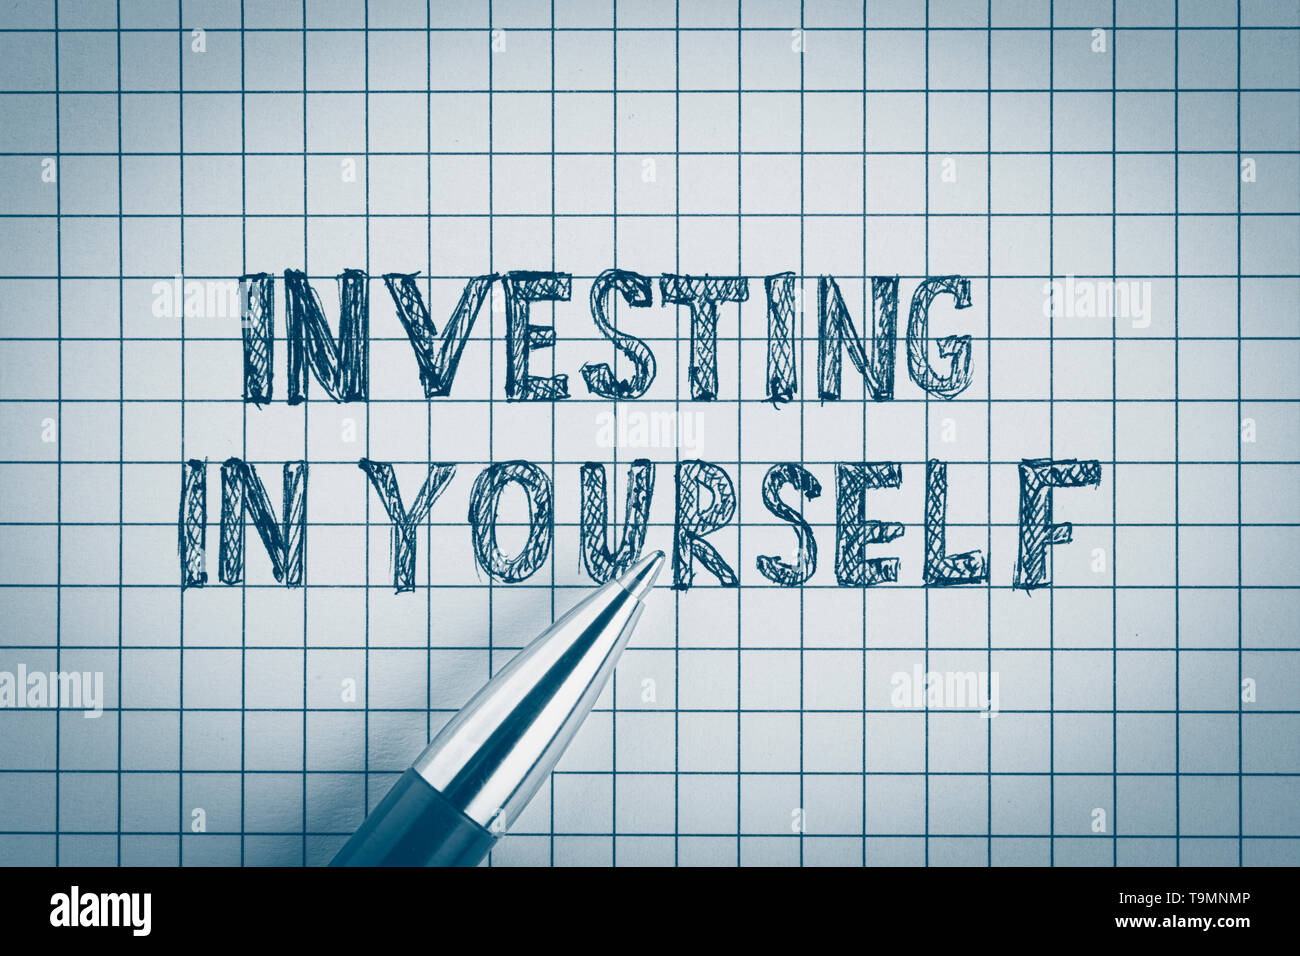 Invest in yourself. Personal development and education concept background. Stock Photo